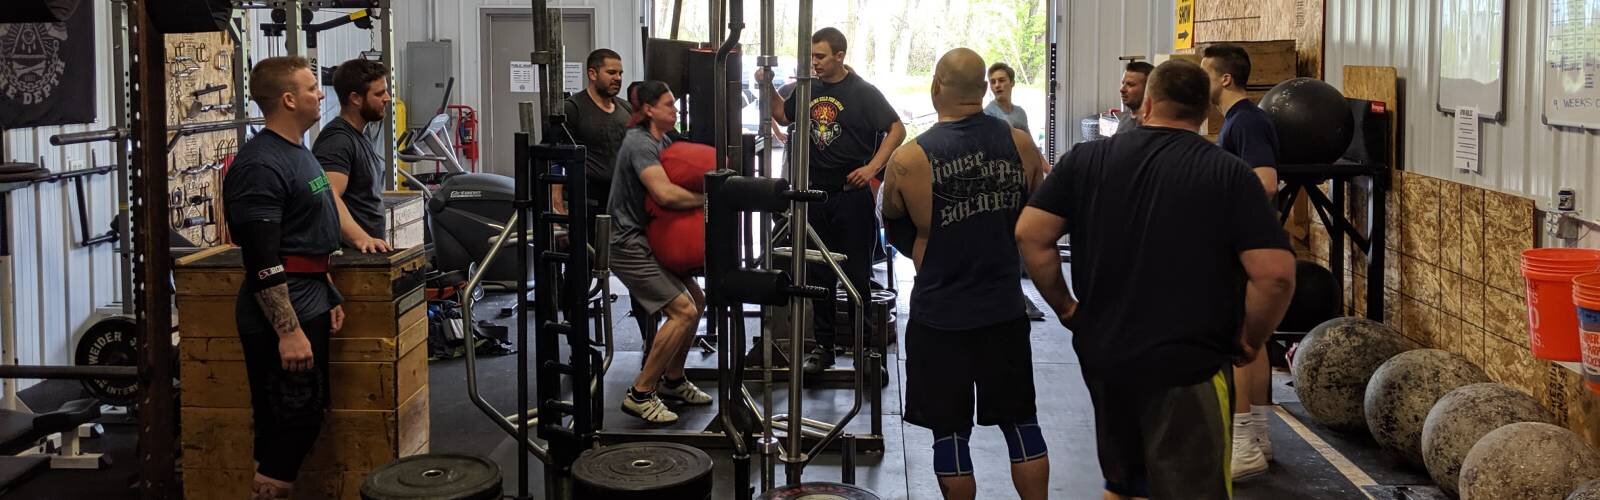 Eric Cedrone’s Iron & Stone Strength gym has become the homefront for WNY’s strongman community.